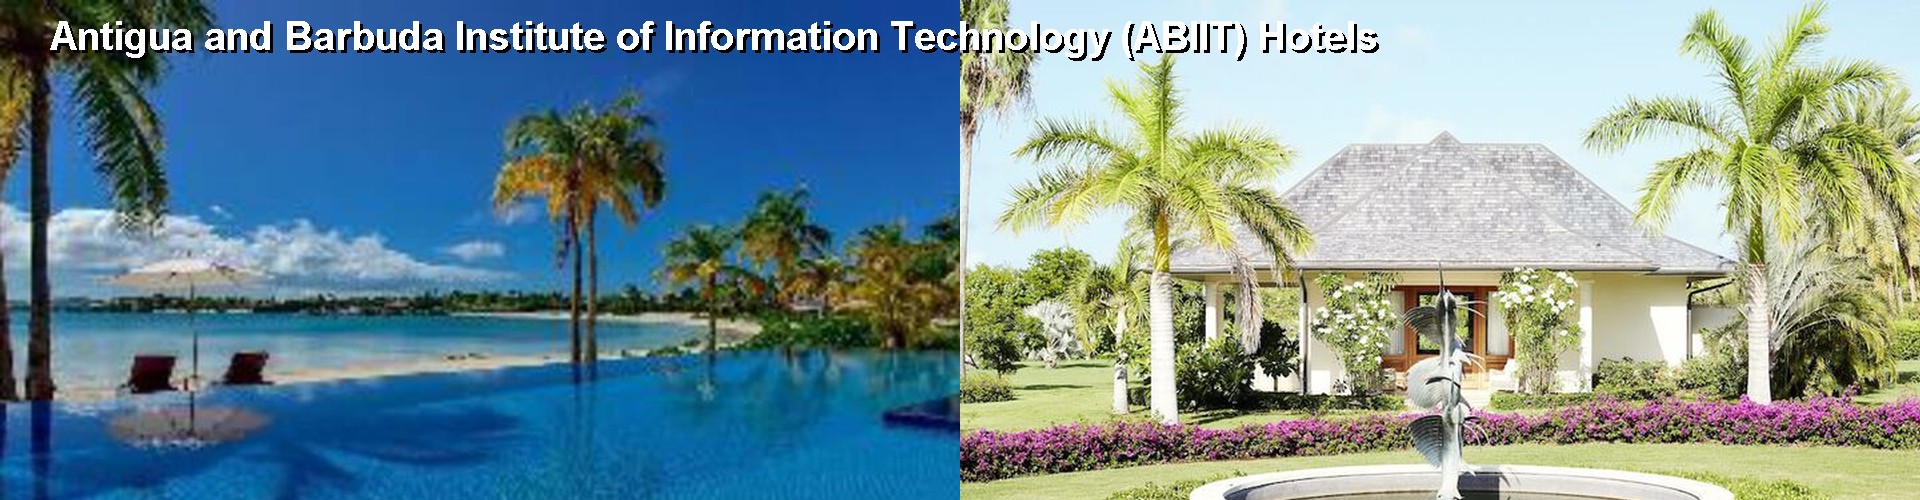 5 Best Hotels near Antigua and Barbuda Institute of Information Technology (ABIIT)